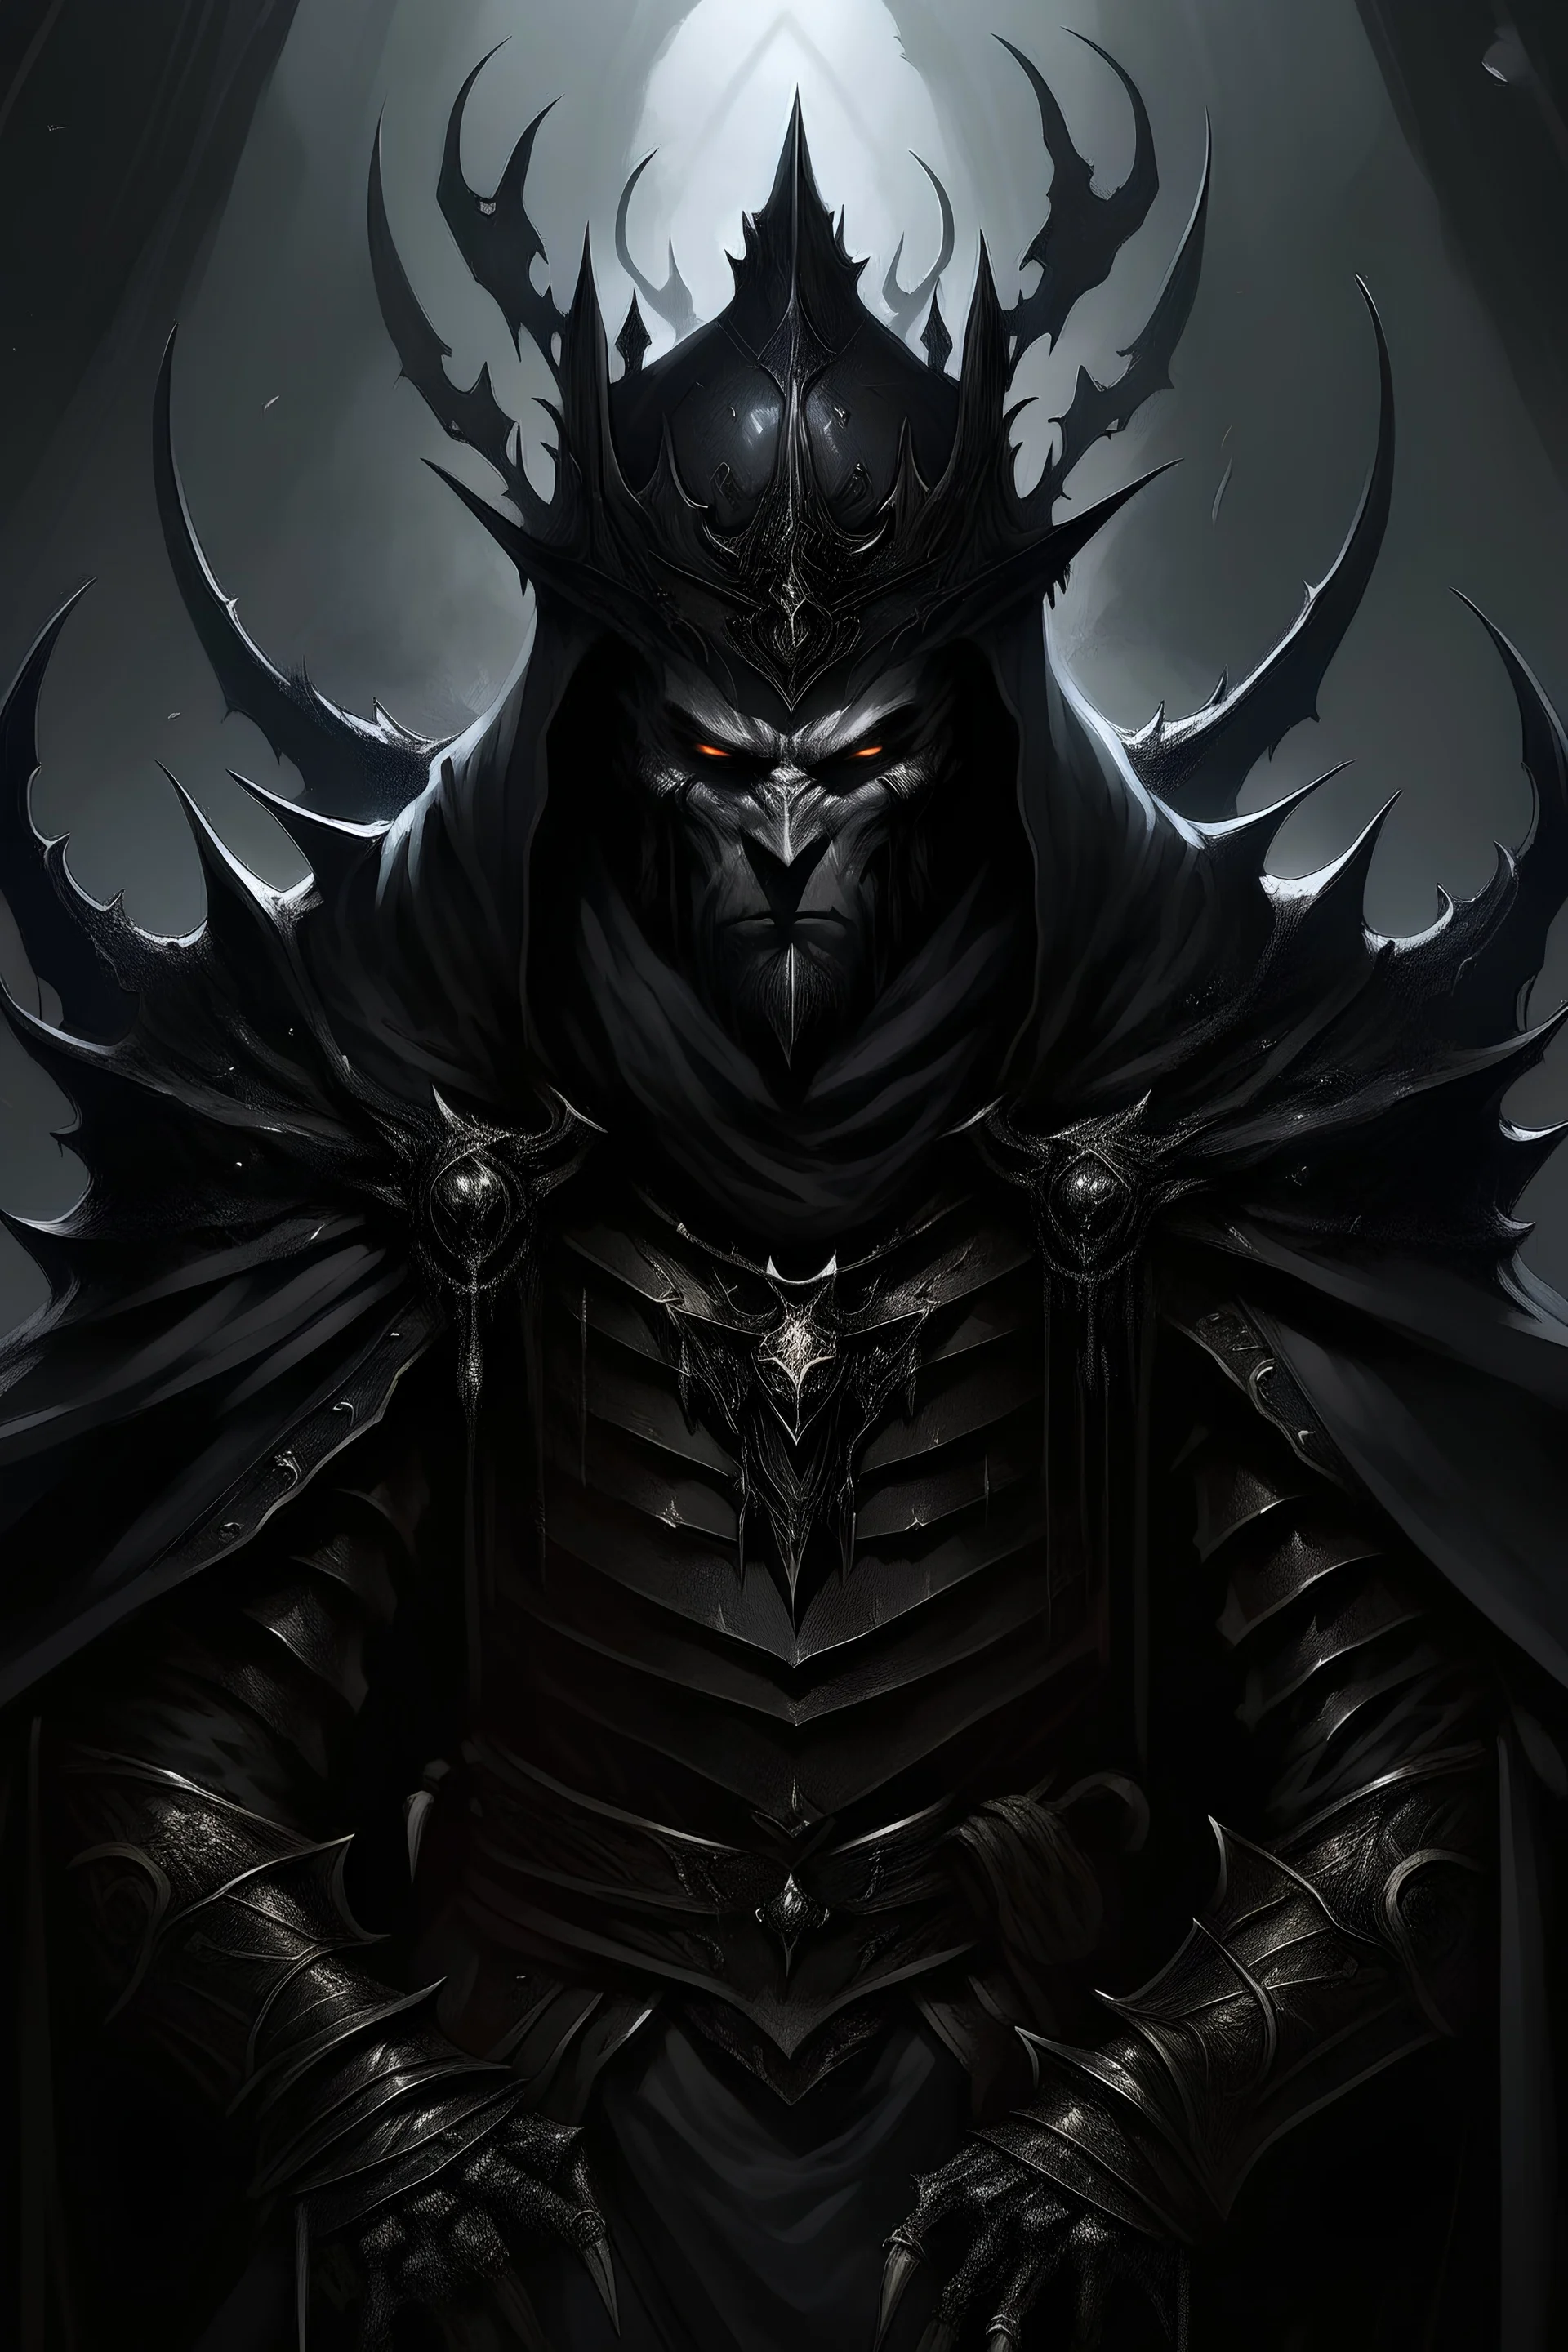 A malevolent king draped in flowing black attire that seems to absorb the surrounding light. His sinister crown, adorned with ominous spikes, rests upon a head crowned with jet-black hair. Lord Obsidian's eyes, a dark abyss reflecting cruelty and malice, lock onto you with an unsettling intensity. A deadly grin curves across his face, betraying the depths of his malevolence. In the shadow of his presence, an aura of darkness and foreboding surrounds Lord Obsidian, marking him as an evil man.